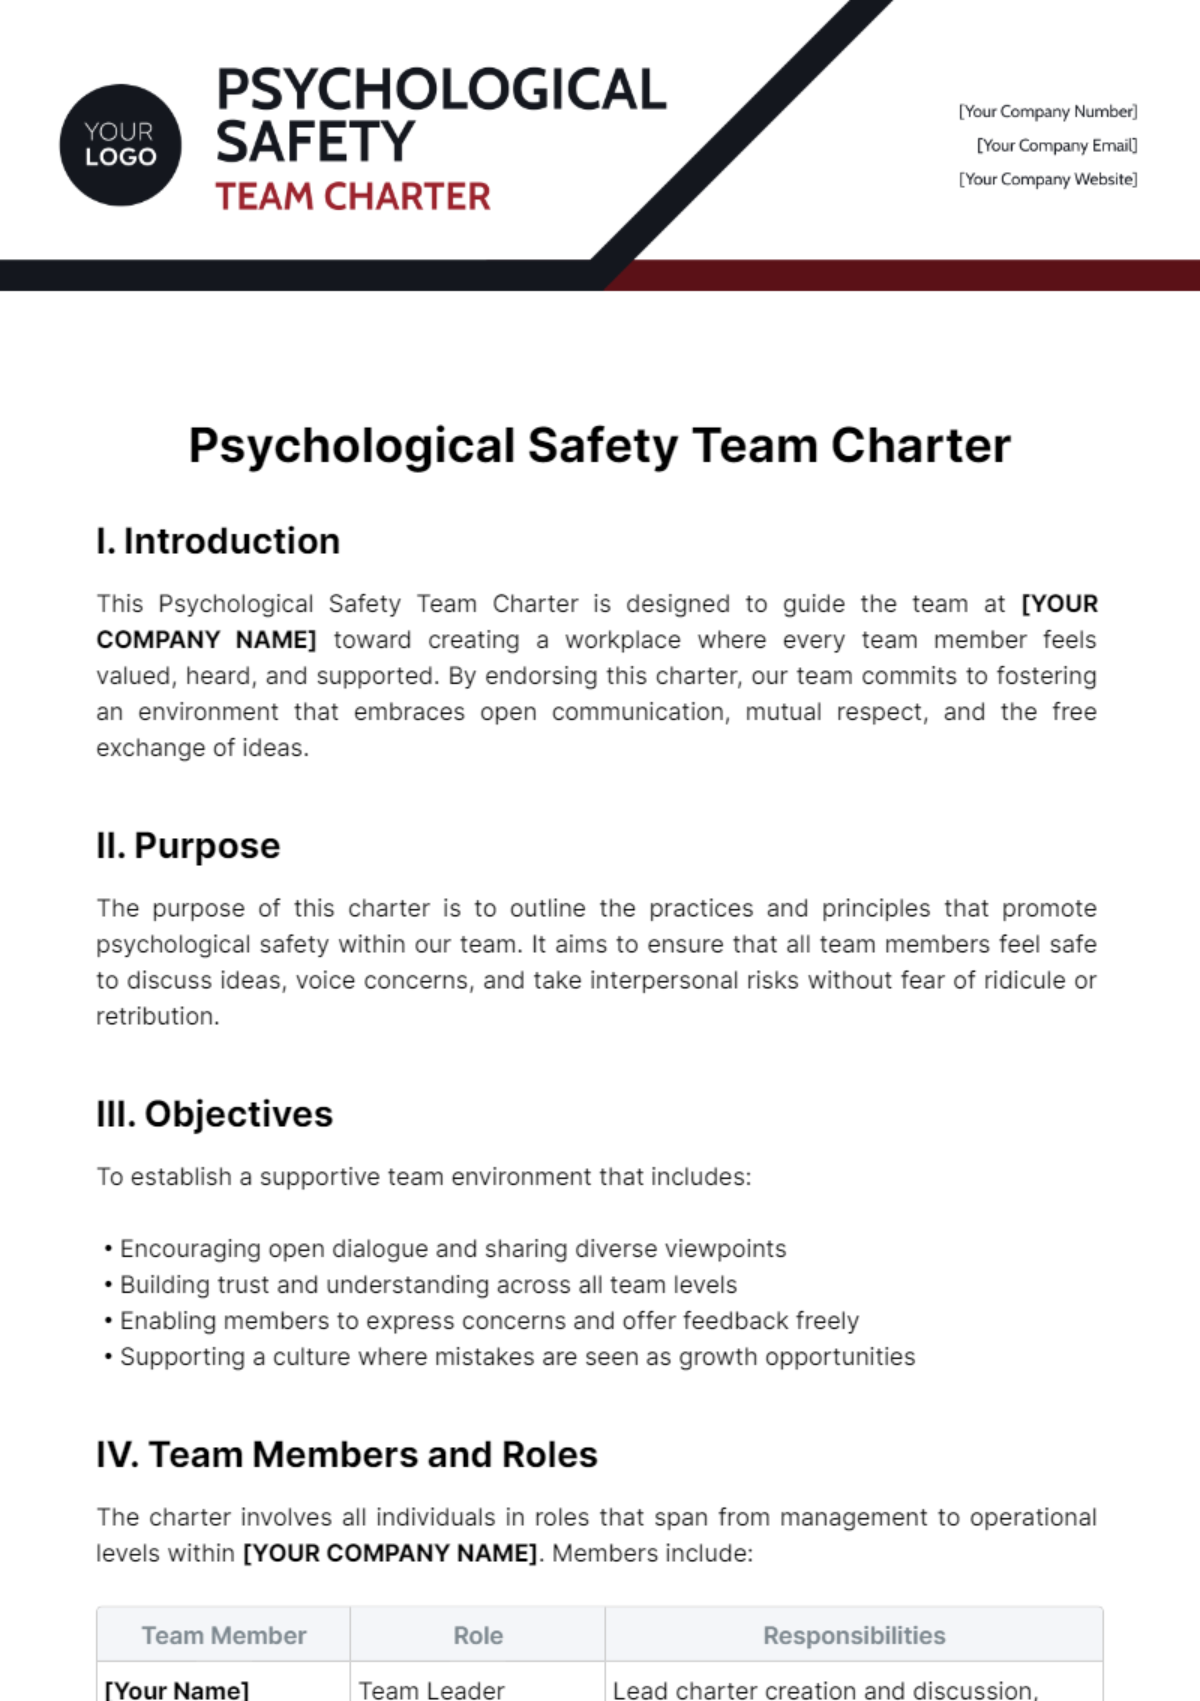 Psychological Safety Team Charter Template